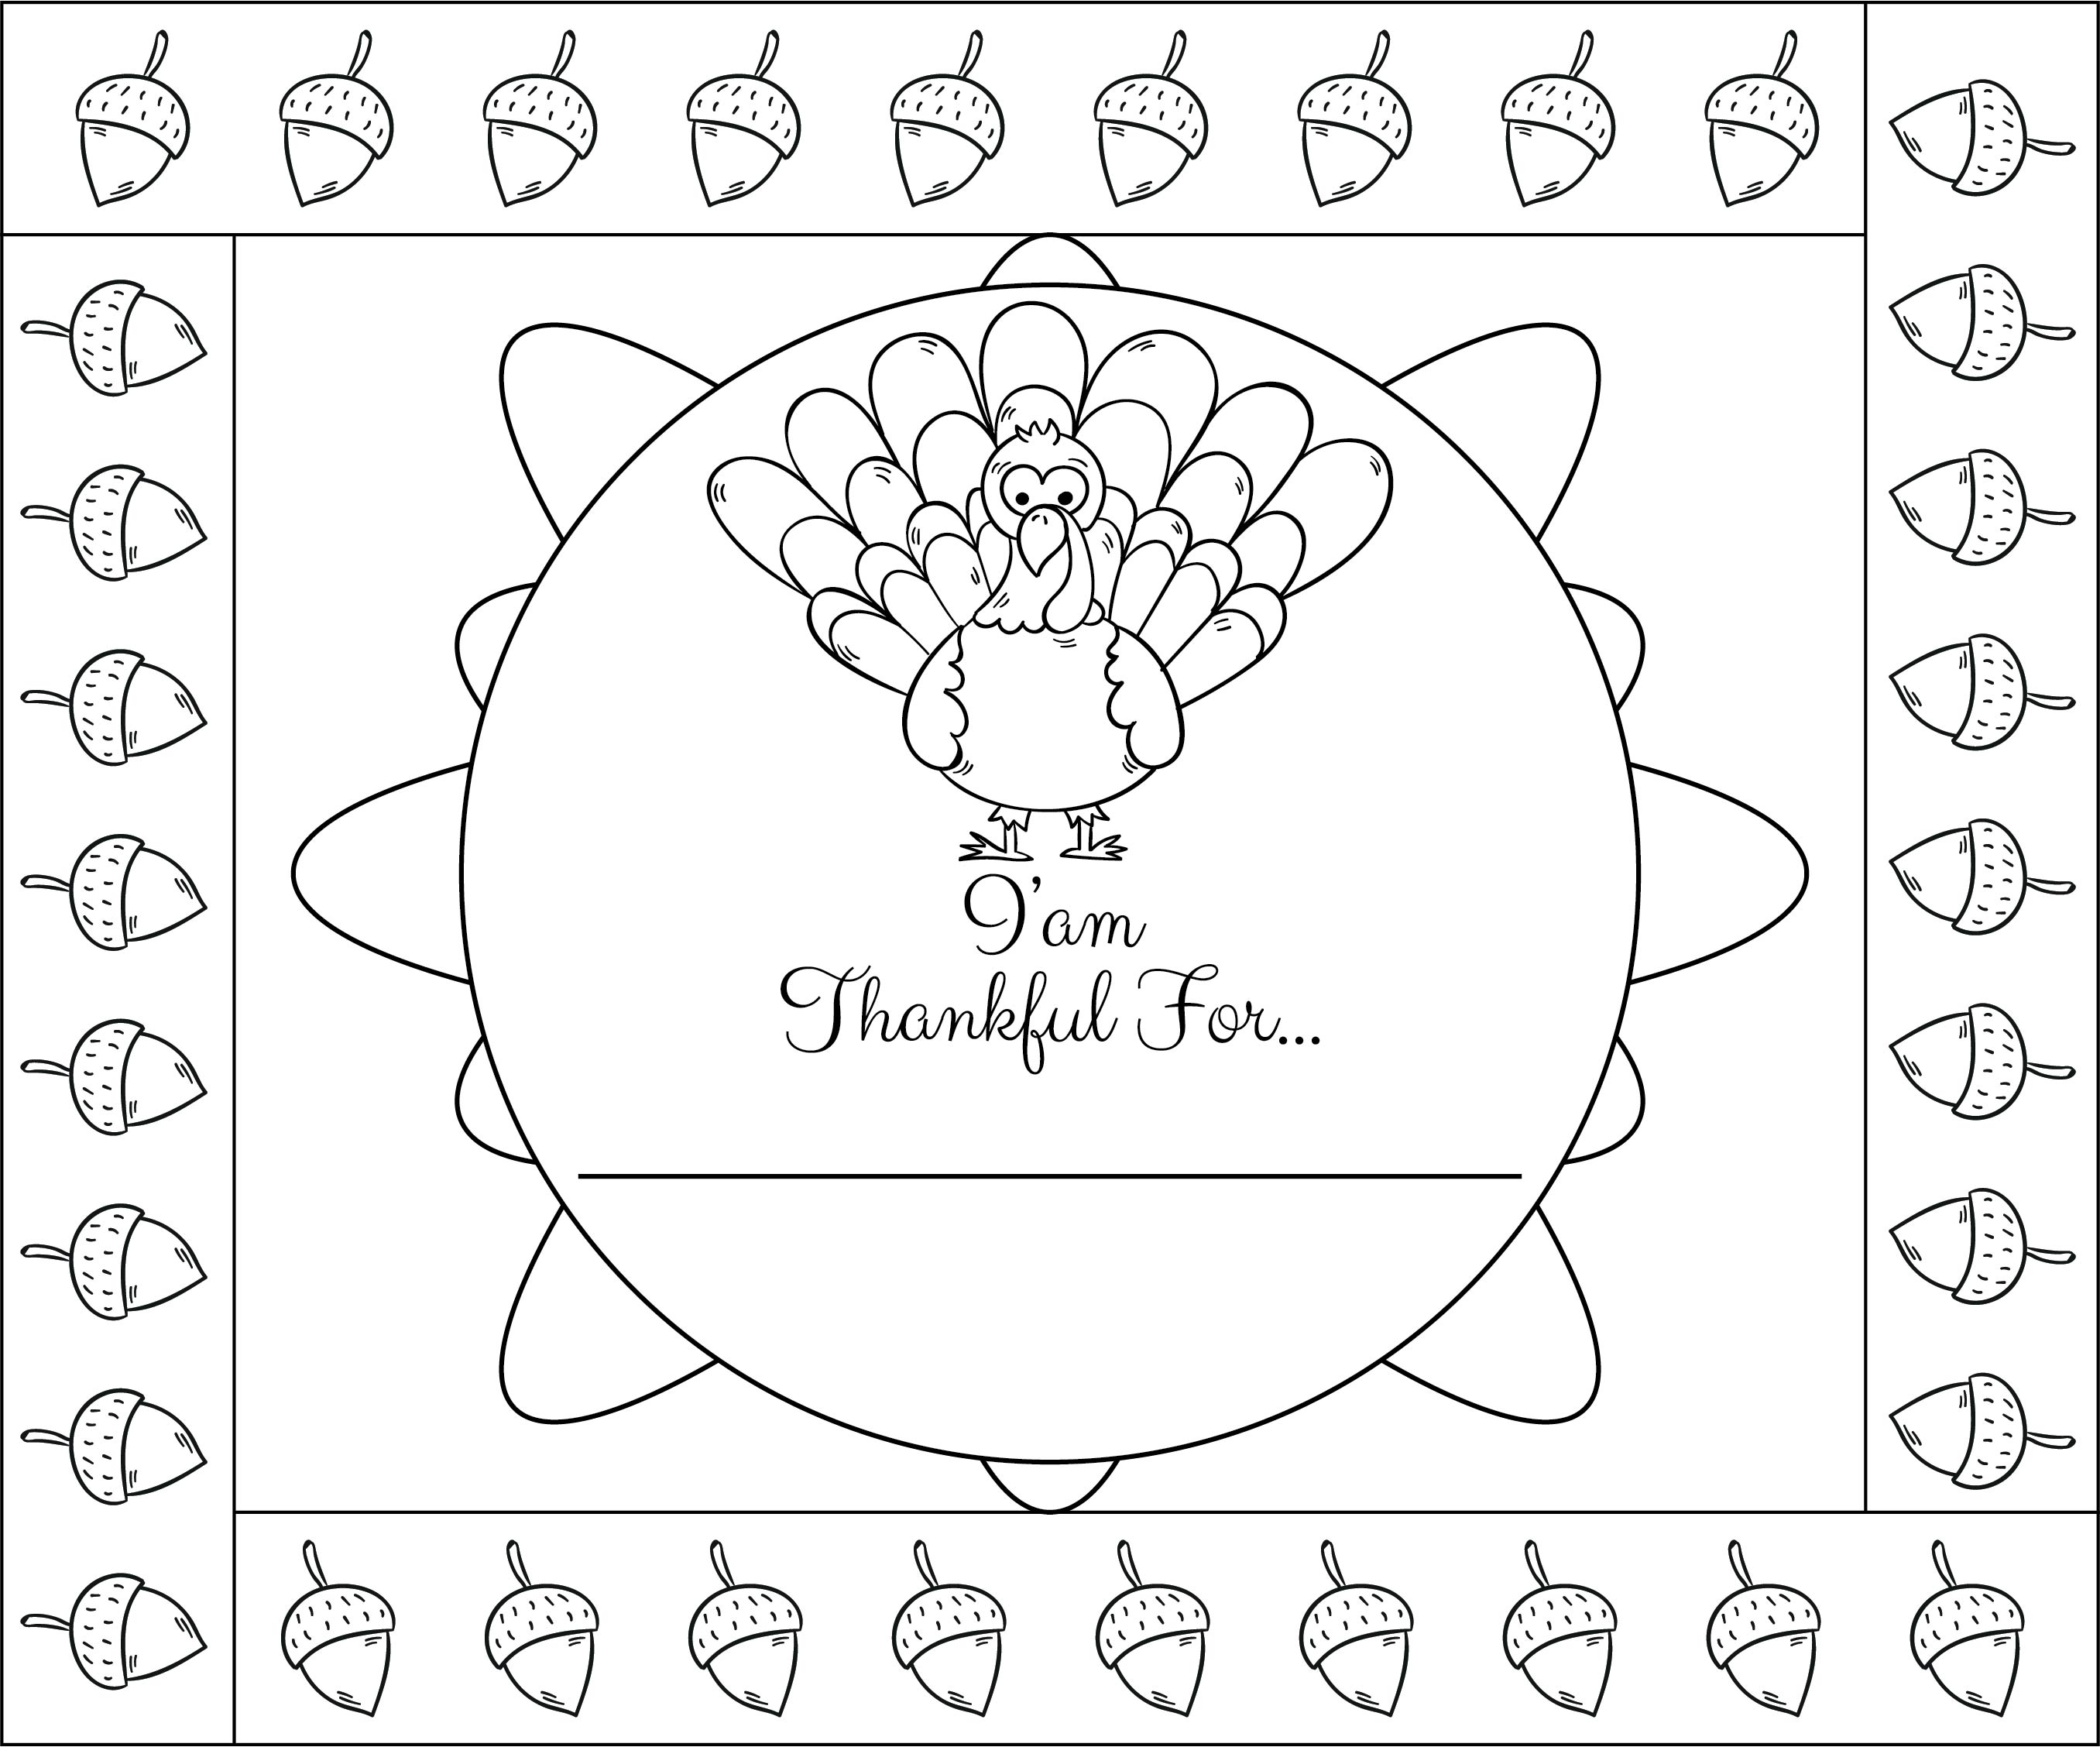 10-best-free-printable-thanksgiving-coloring-placemats-pdf-for-free-at